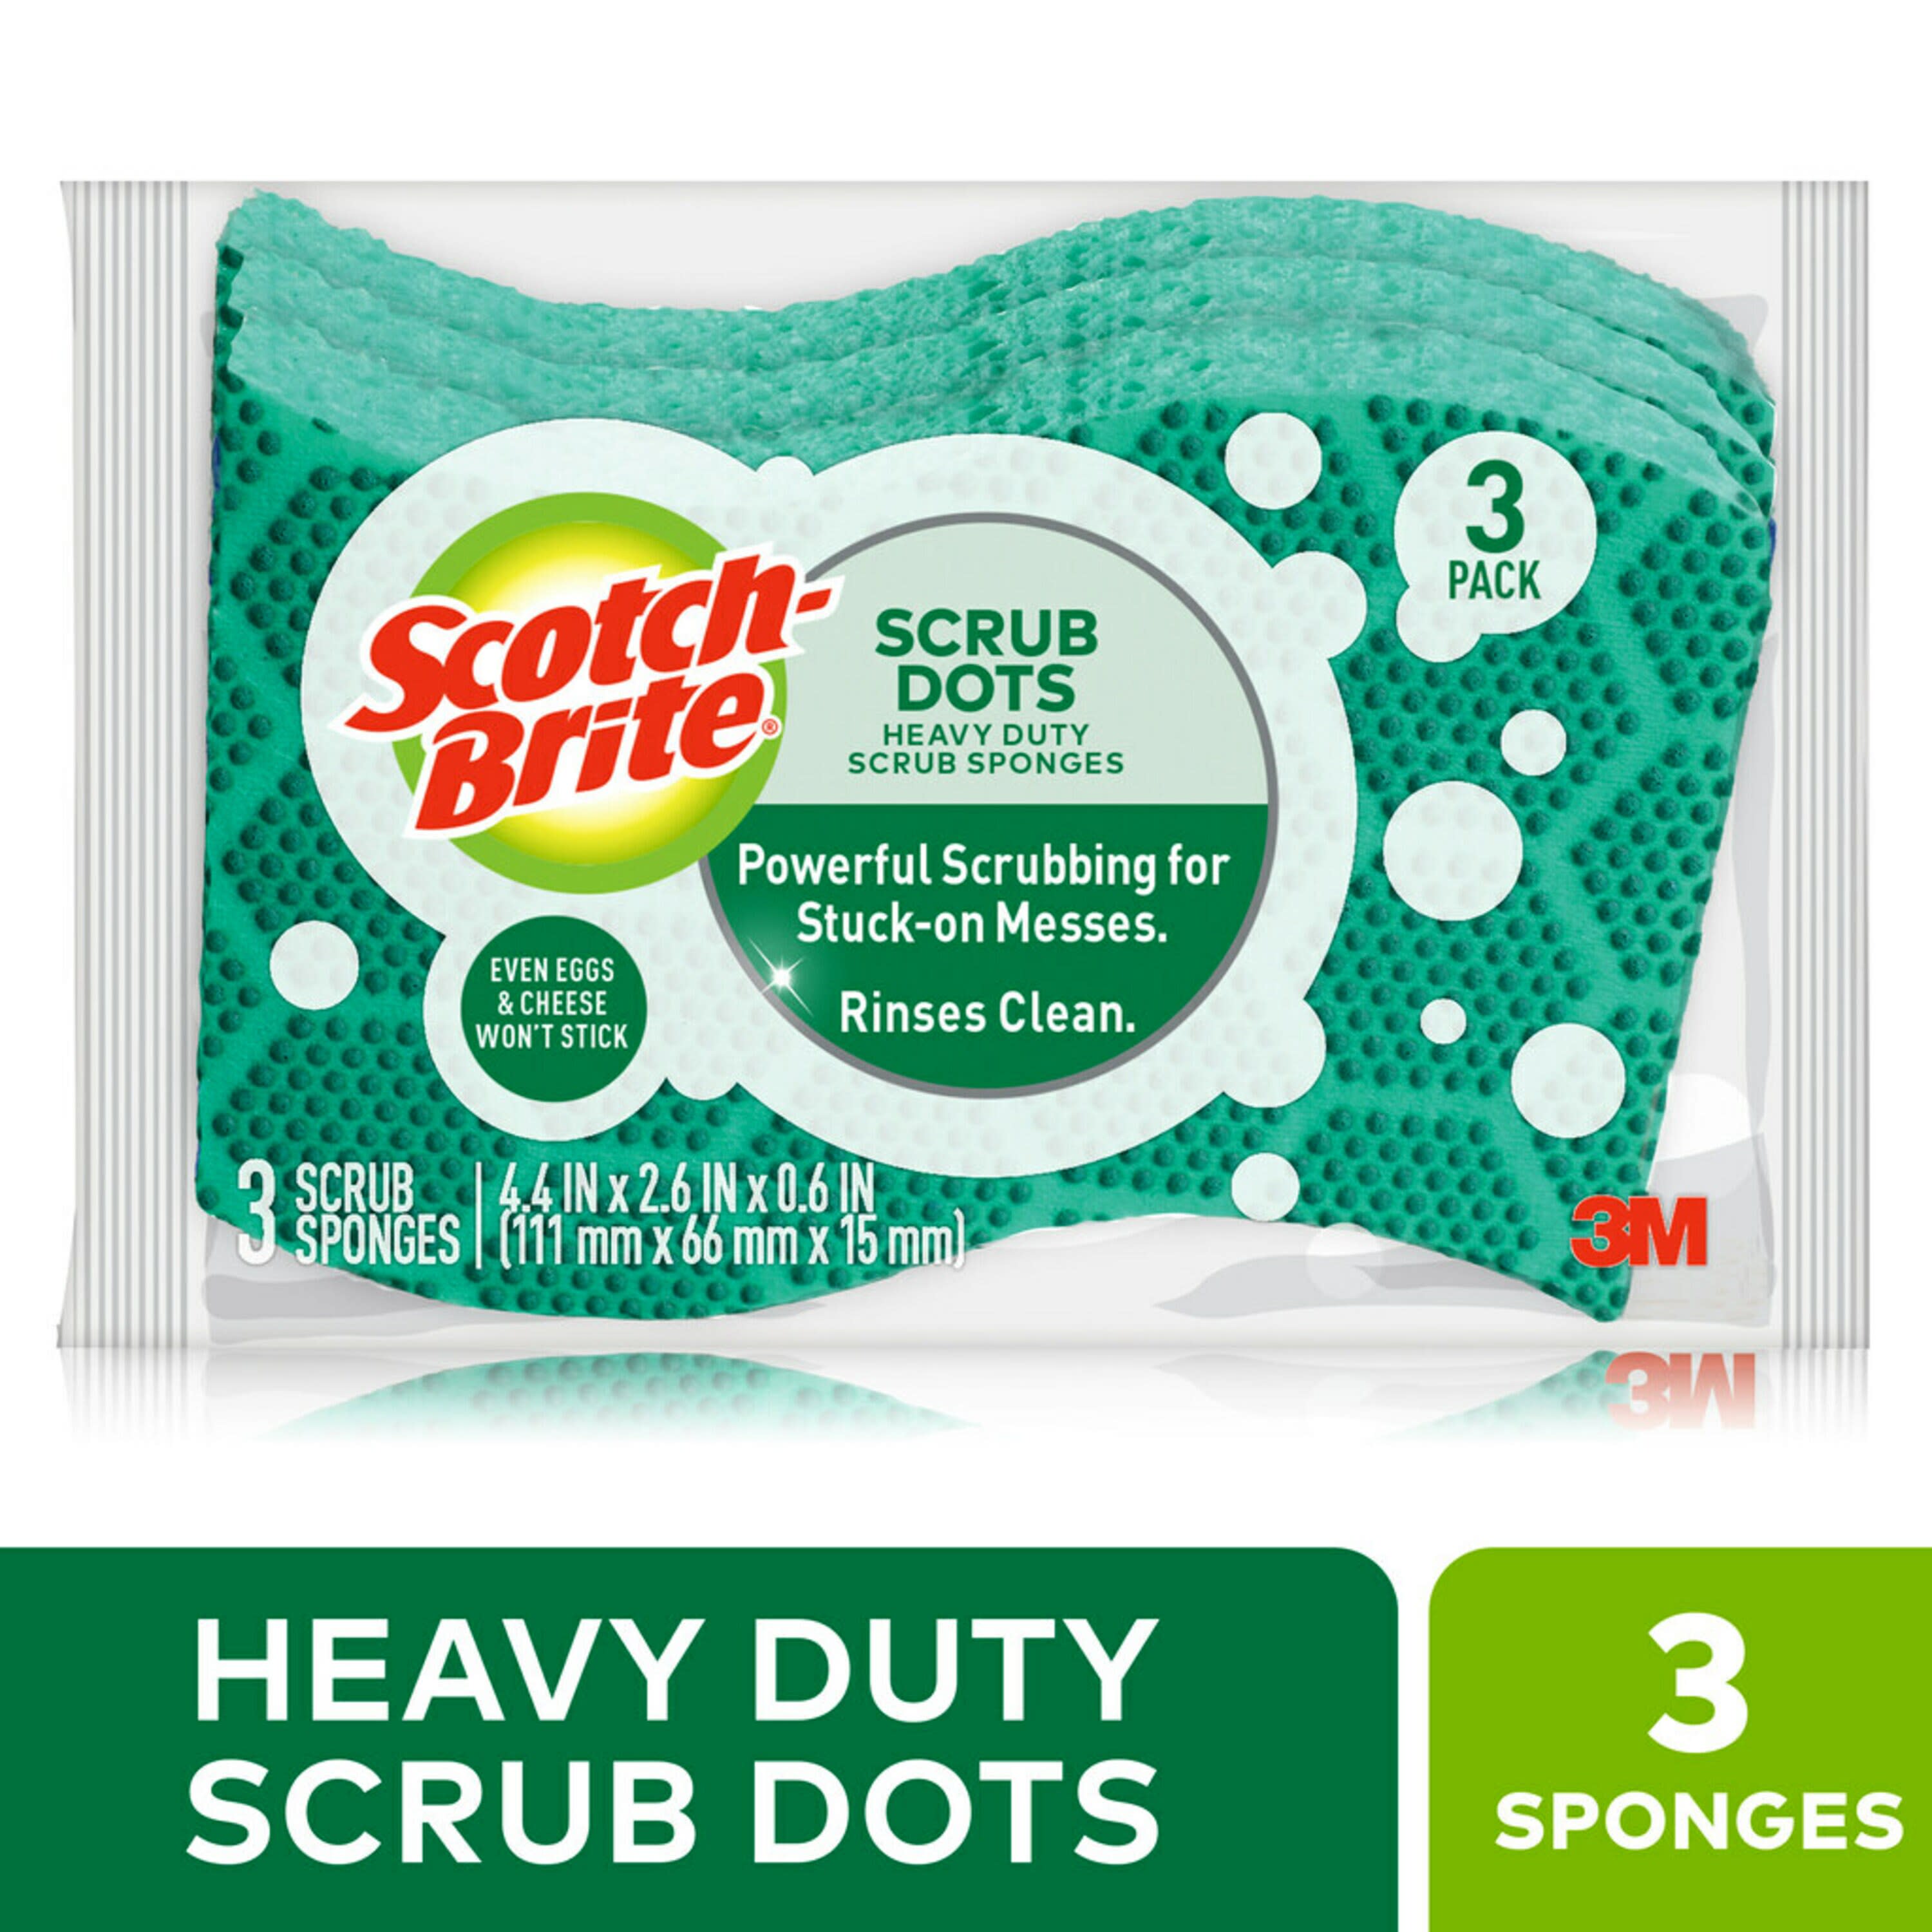 New Scotch Brite Sponge Wipe Large Pack of 3 Free Shipping 